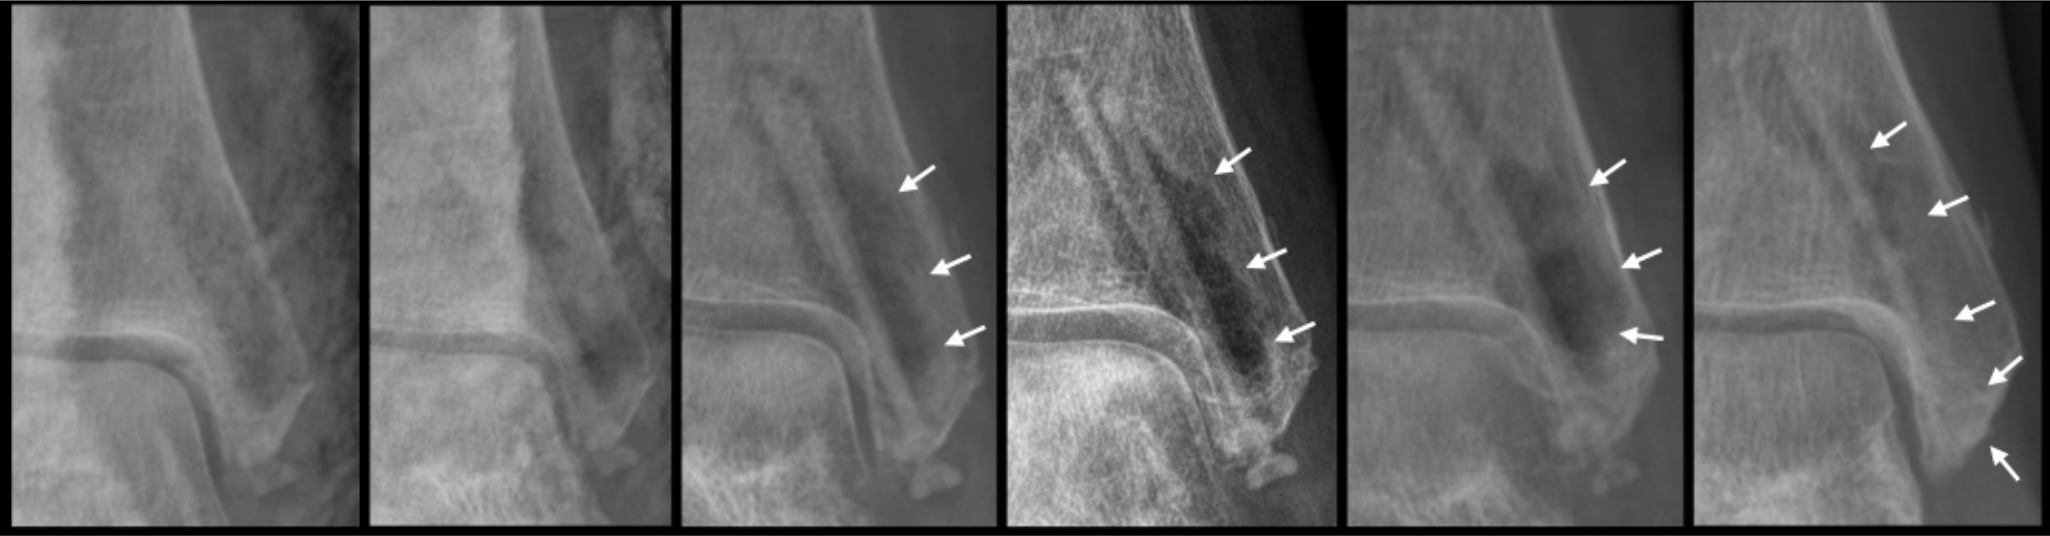 Fig. 4 
            Anteroposterior ankle radiographs of a 61-year-old female patient with pre-existing osteoporosis, bimalleolar fracture with a posterior malleolar fragment. From left to right, anteroposterior ankle radiograph after surgery, after two weeks (reduction of the fractures with two magnesium (Mg)-based screws and a titanium plate and screws), after six weeks (obvious radiolucent zones fracture consolidation), after 12 weeks (steady radiolucency, small sclerotic line at the border of the radiolucent zone to the surrounding tissue), after 24 weeks, and after 52 weeks (steady sclerotic line, increase in density at former radiolucent area). The white arrows show the gas formation arround the screw.
          